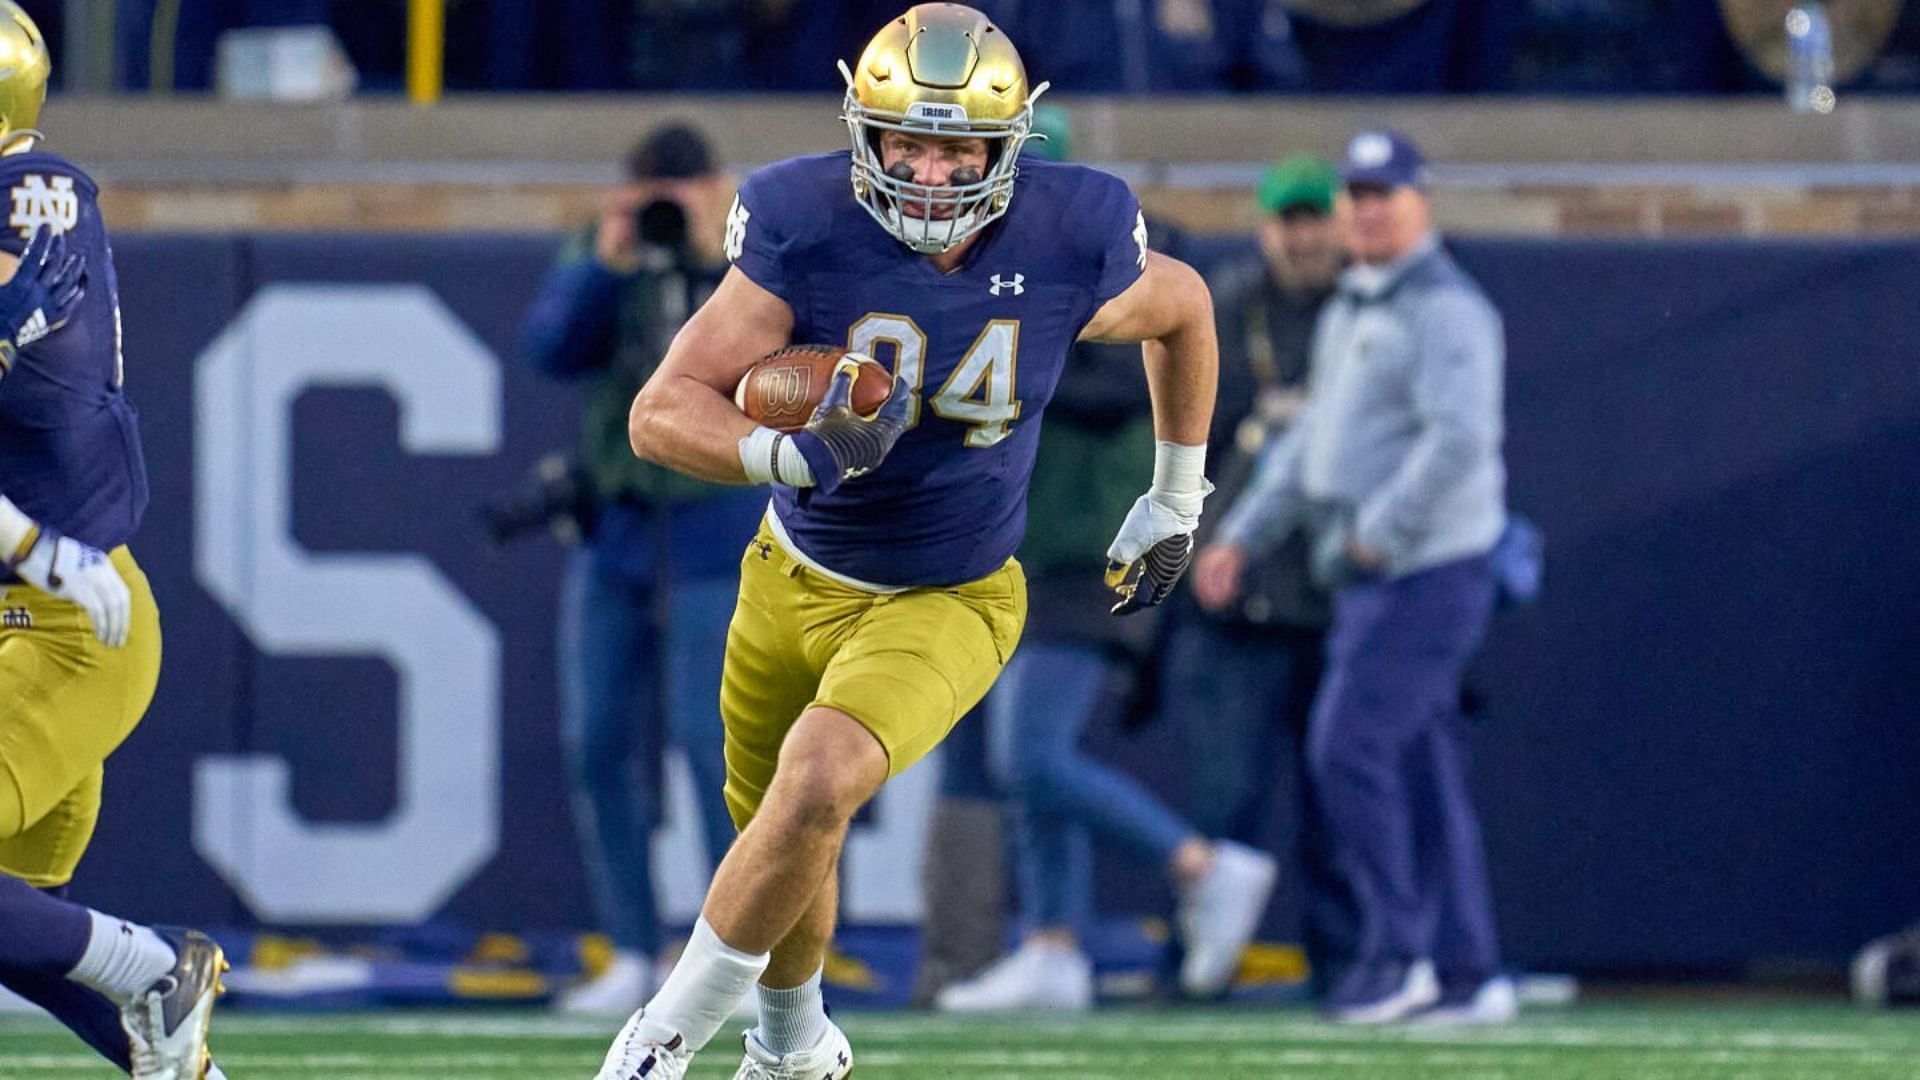 The Notre Dame Fighting Irish will be without tight end Kevin Bauman